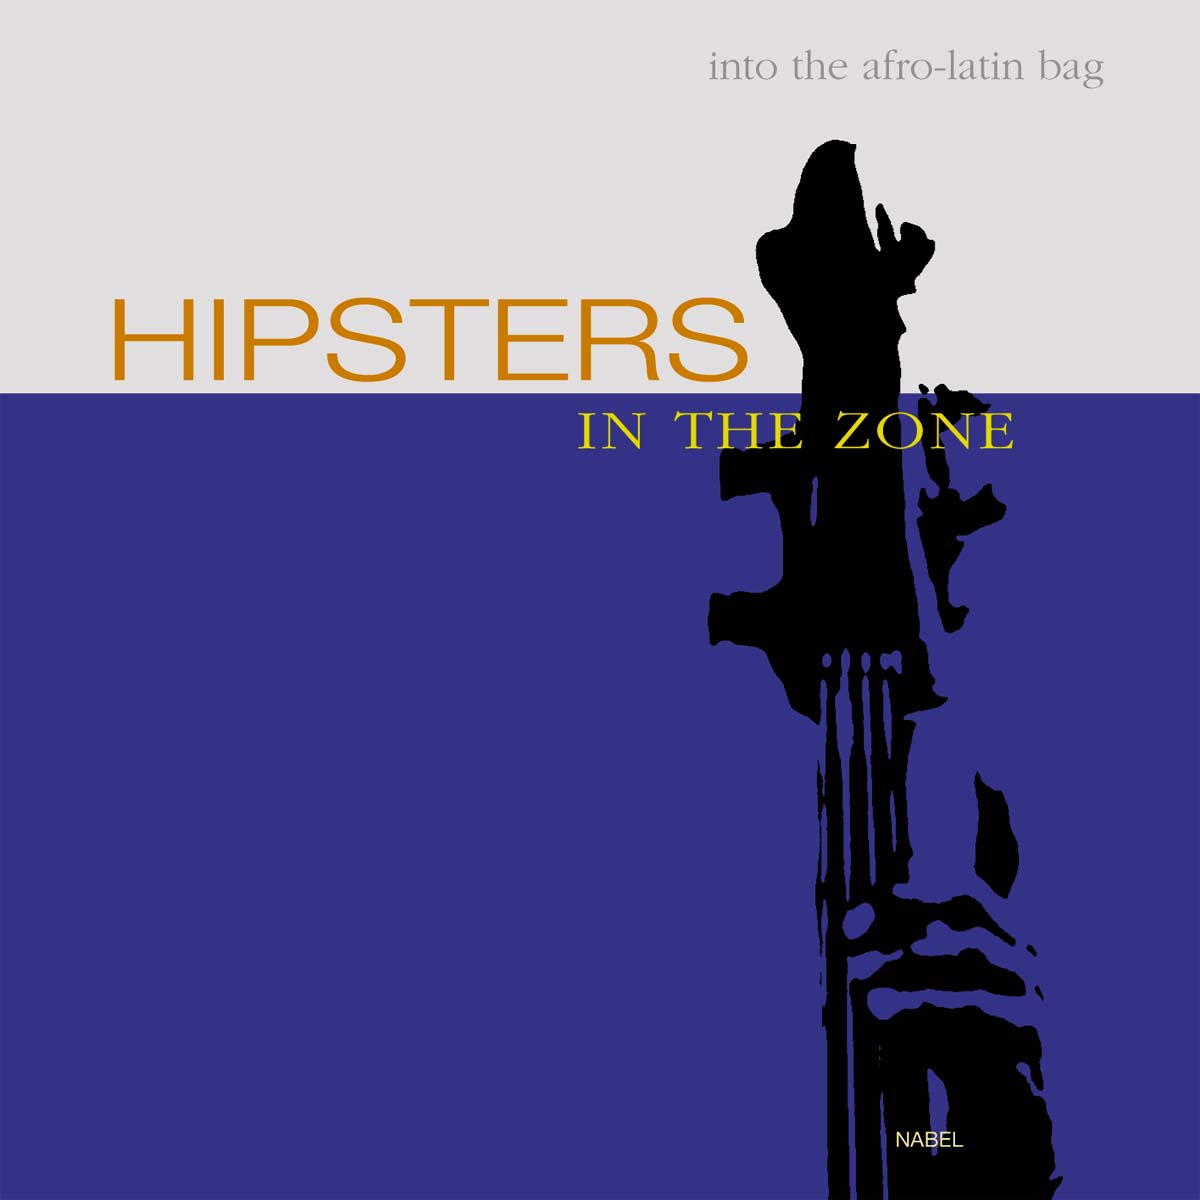 Hipsters in the zone